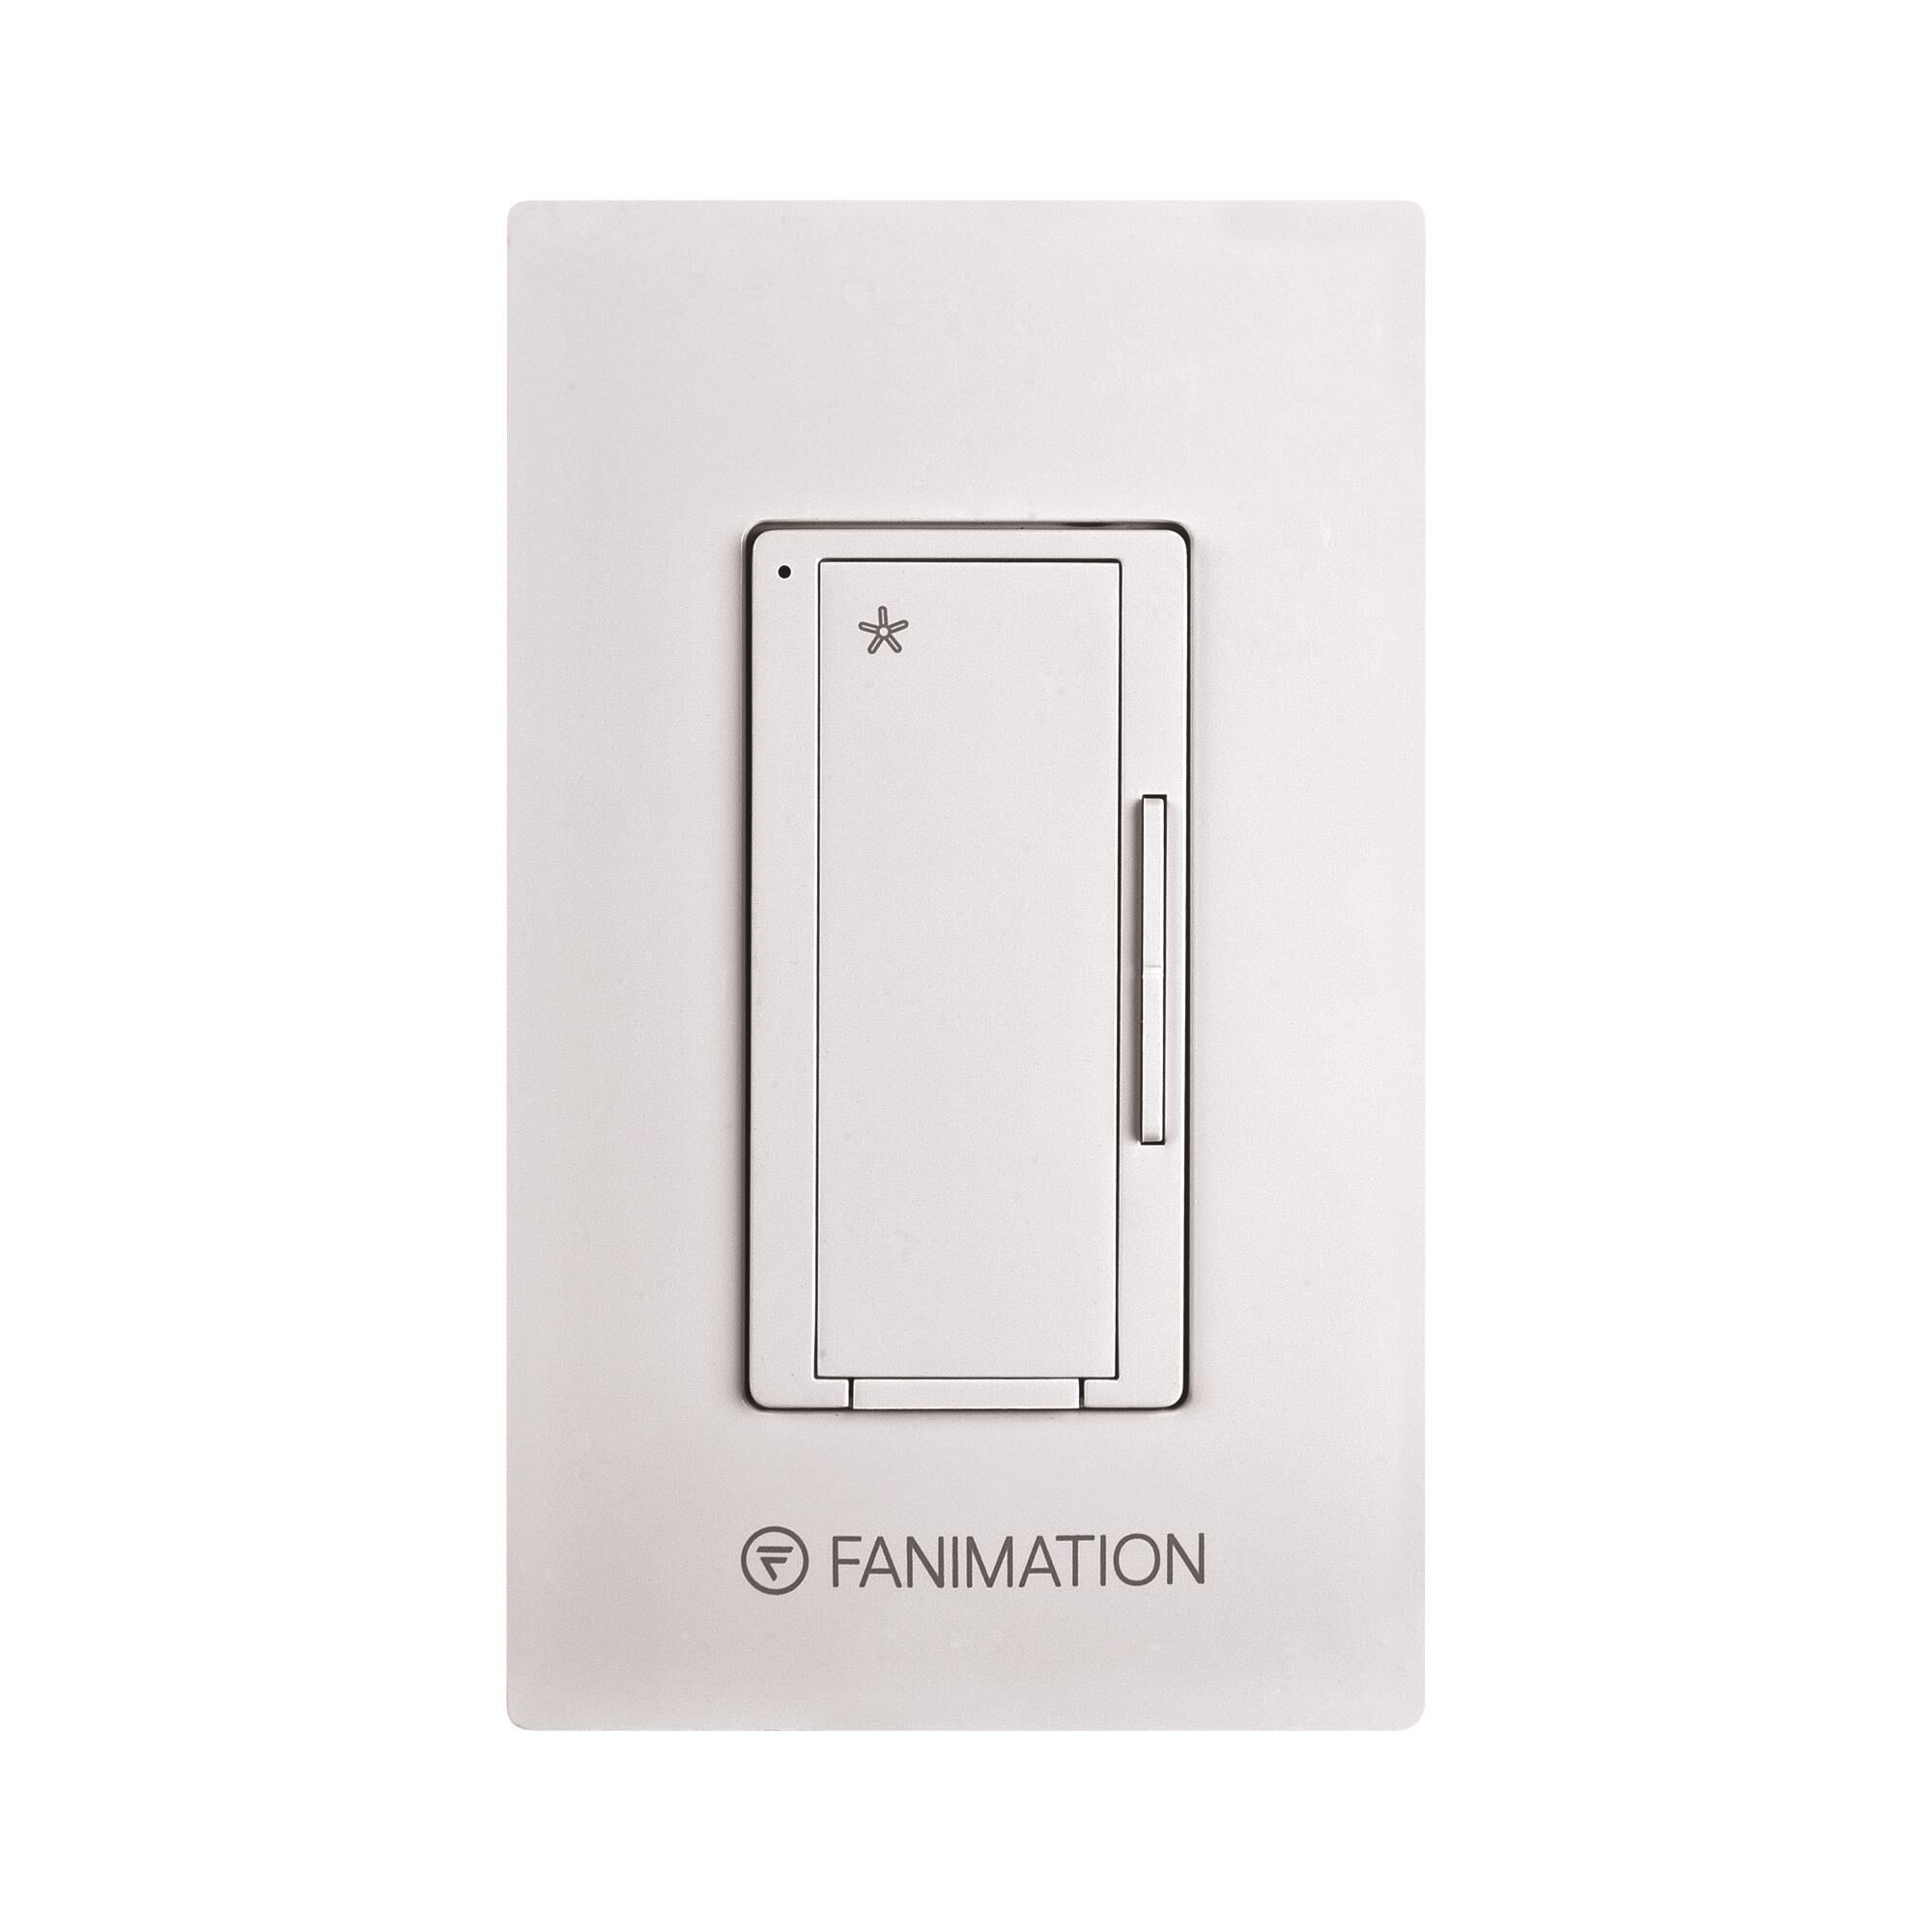 Photos - Fan imation  Control - WC1WH WC1WH